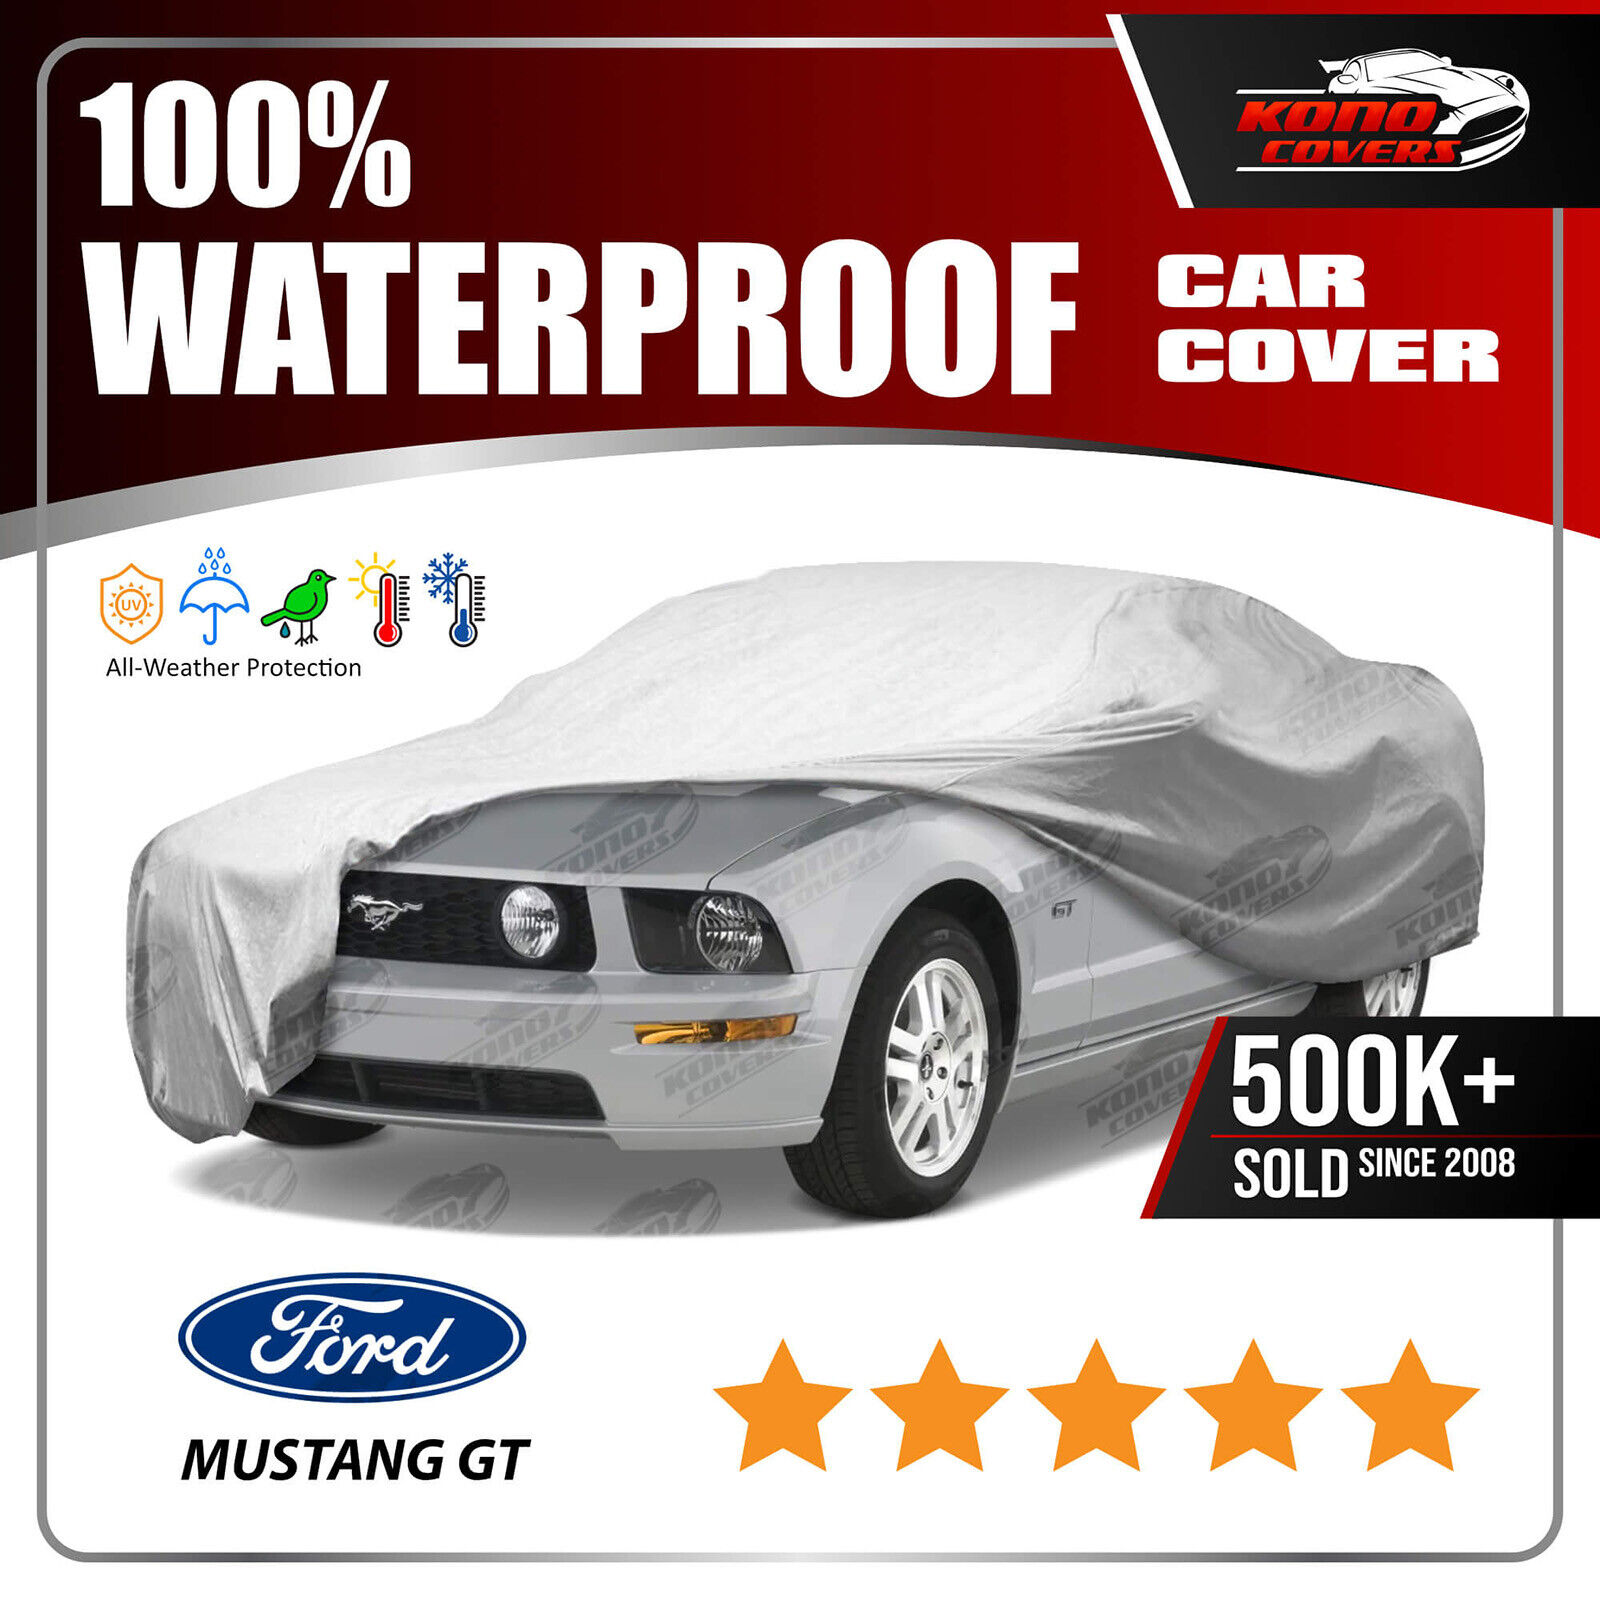 FORD MUSTANG SALEEN 2005-2009 CAR COVER - 100% Waterproof 100% Breathable